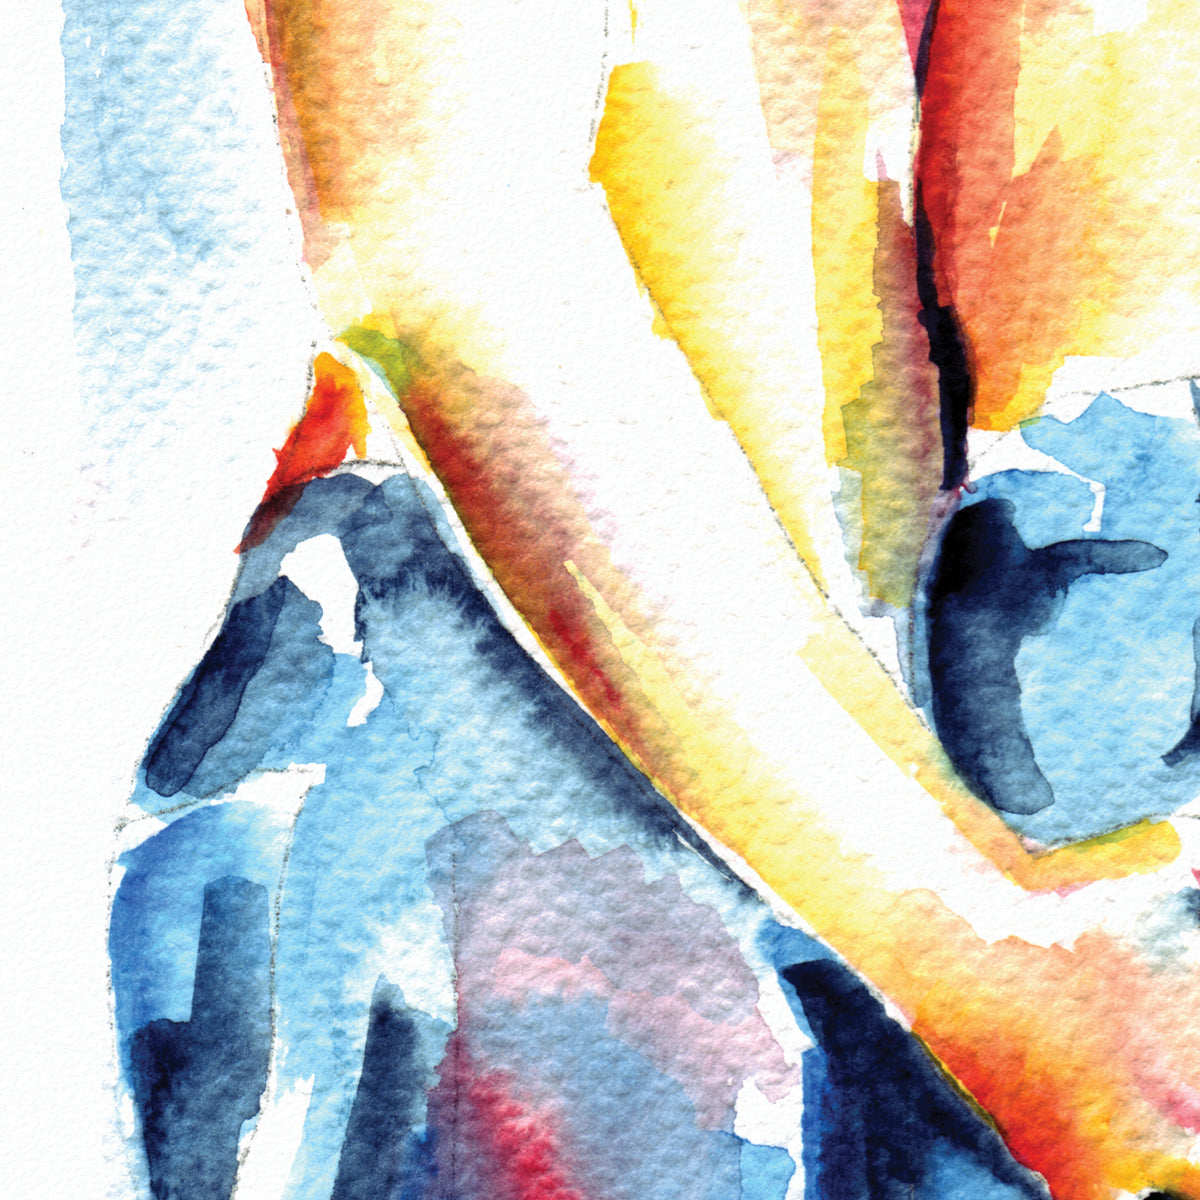 Male Nude Lovers: Passionate Embrace & Intimate Connection - Giclee Art Print